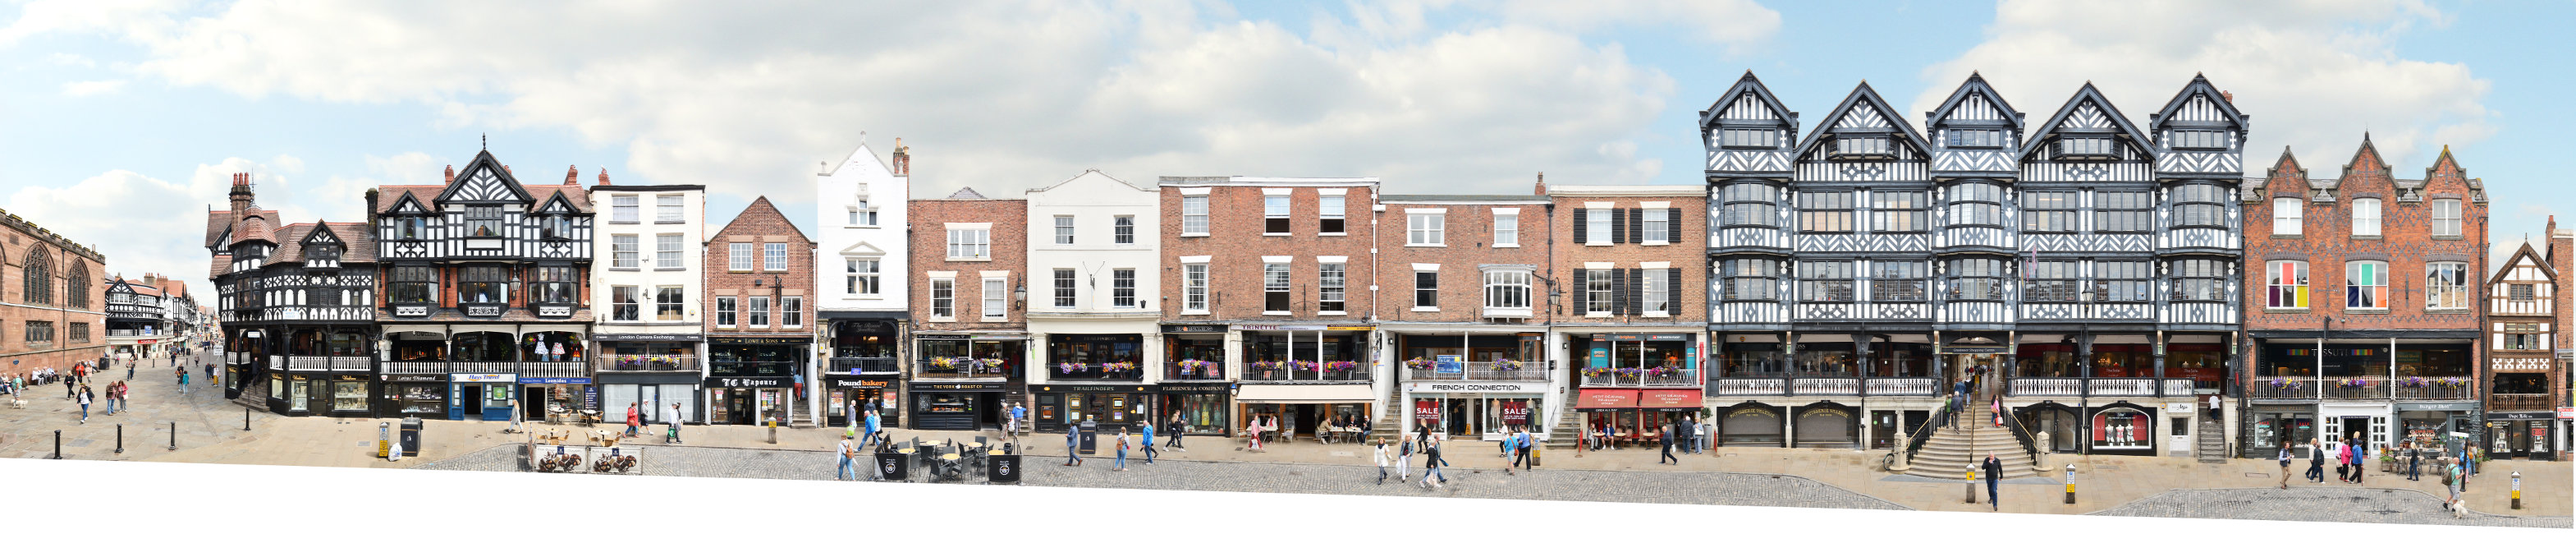 Chester Black and White Revival Panorama